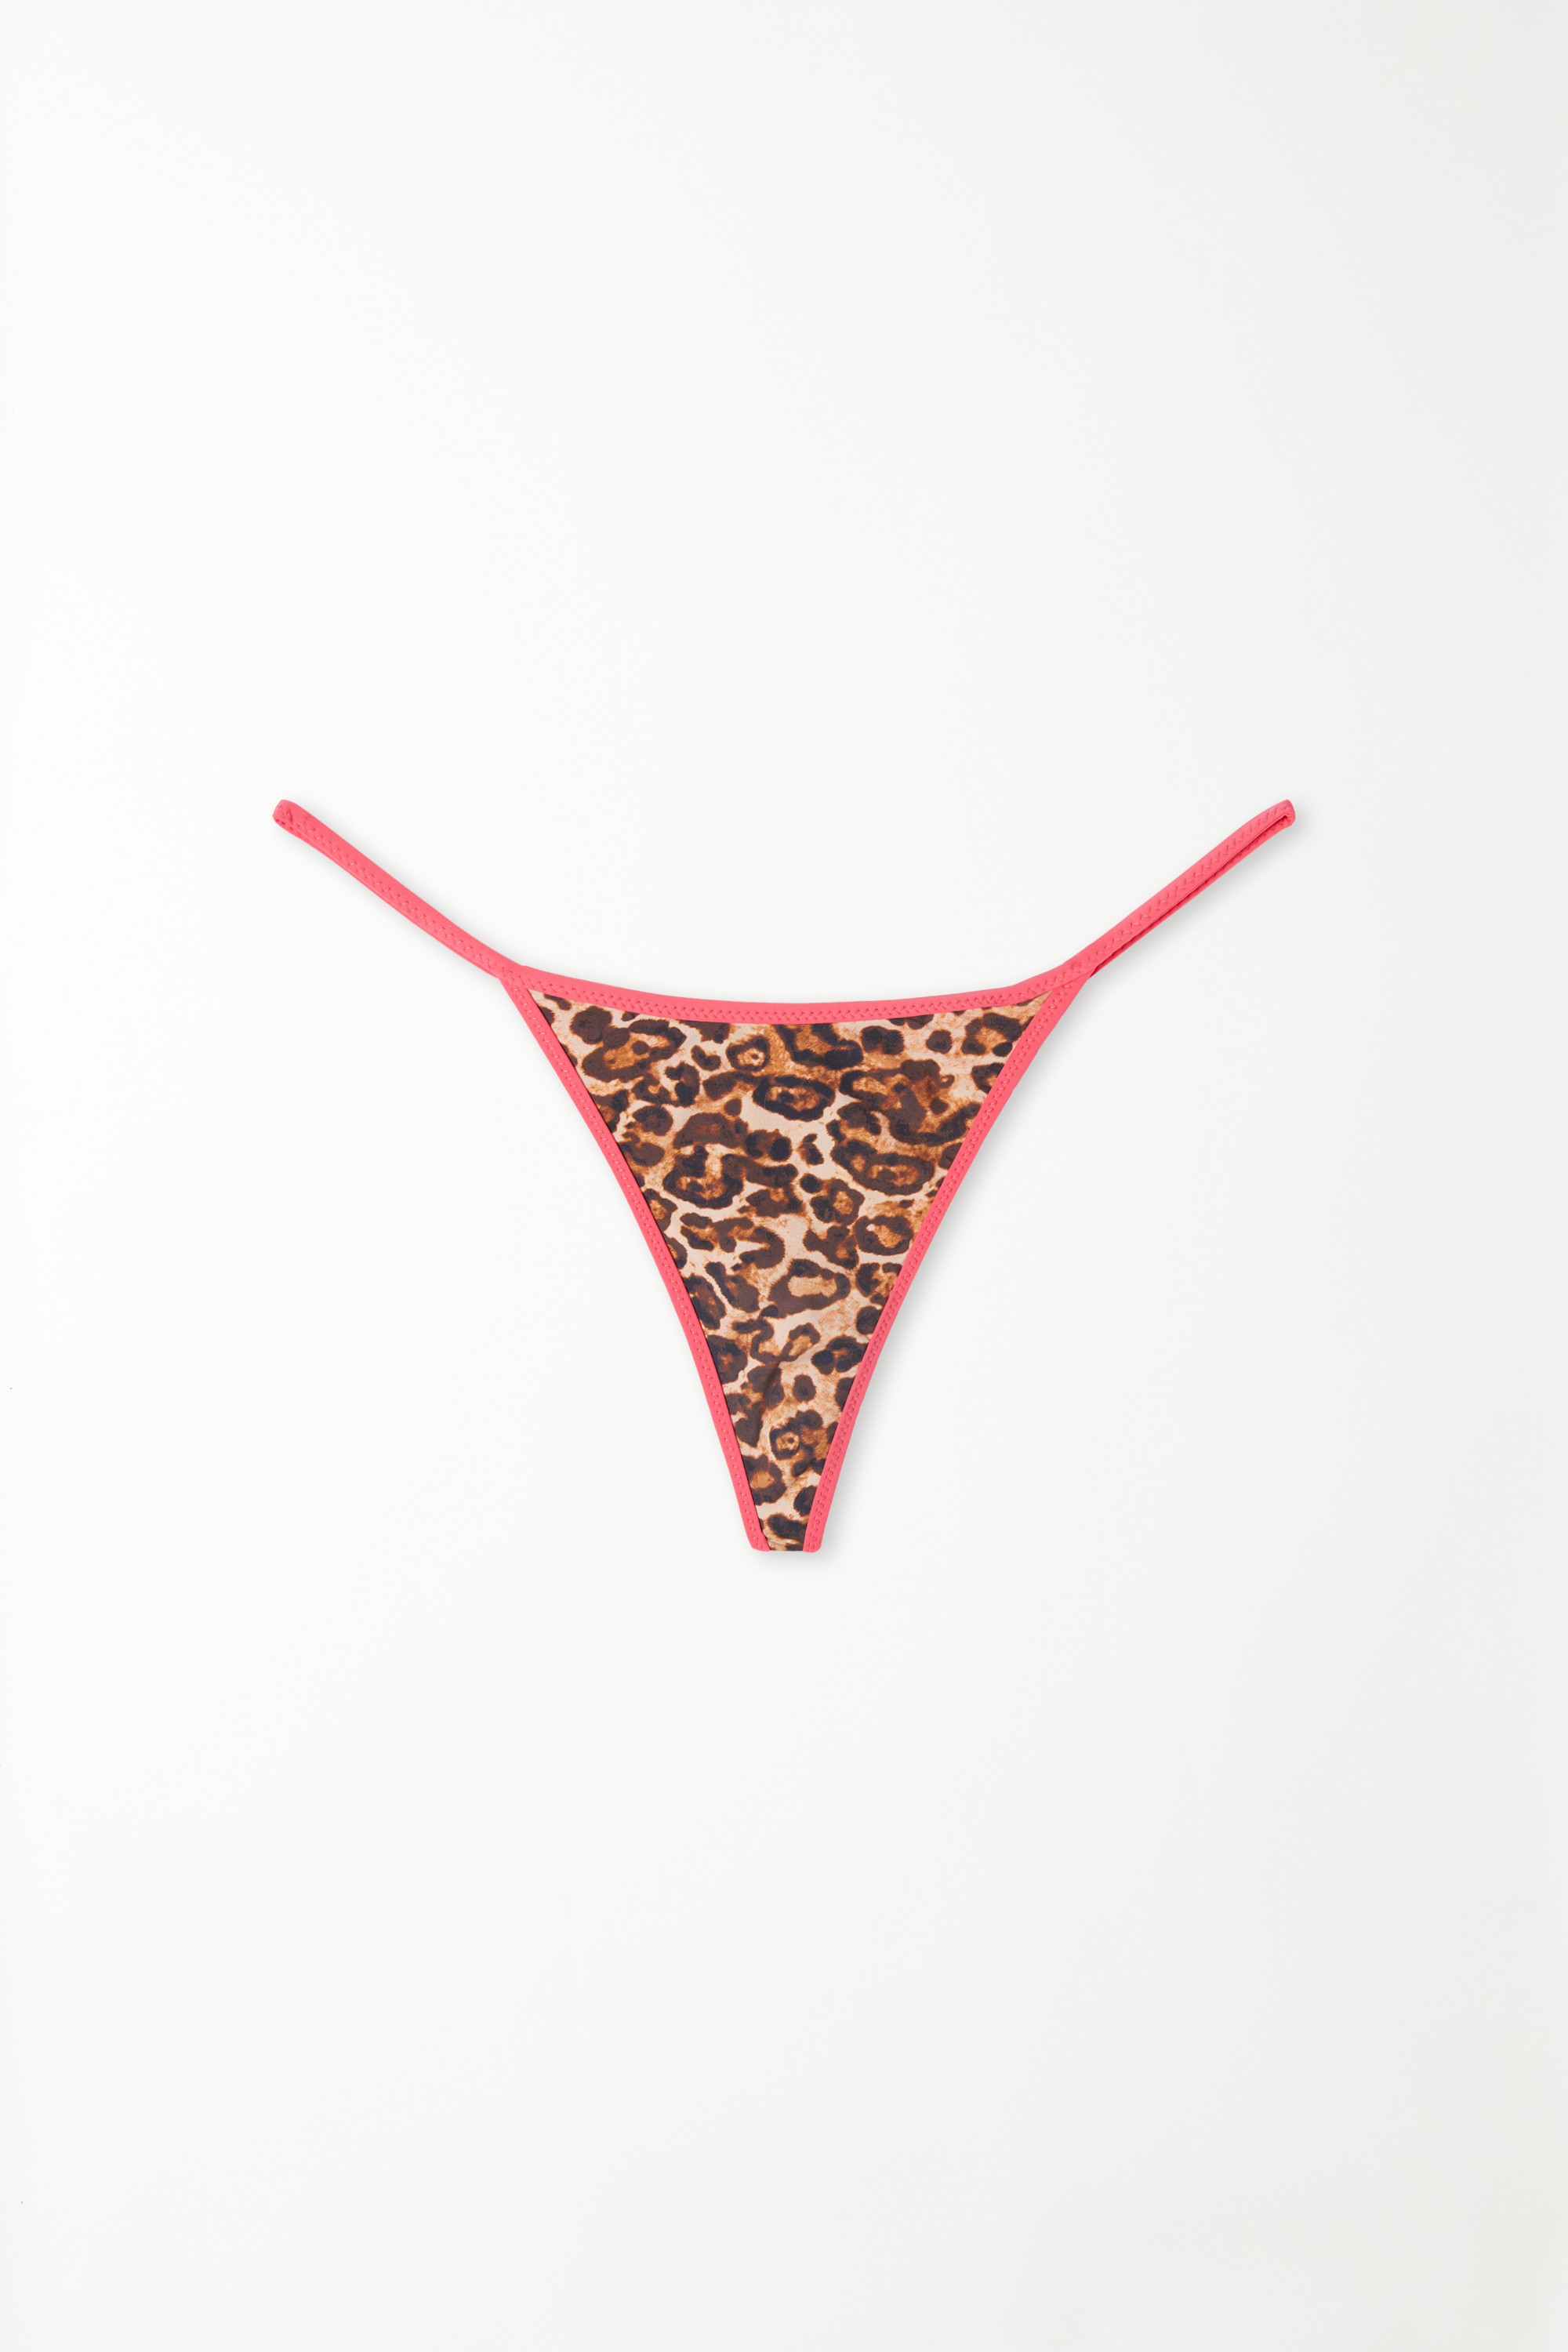 Strawberry Leopard G-String with Tanga-Style Panel